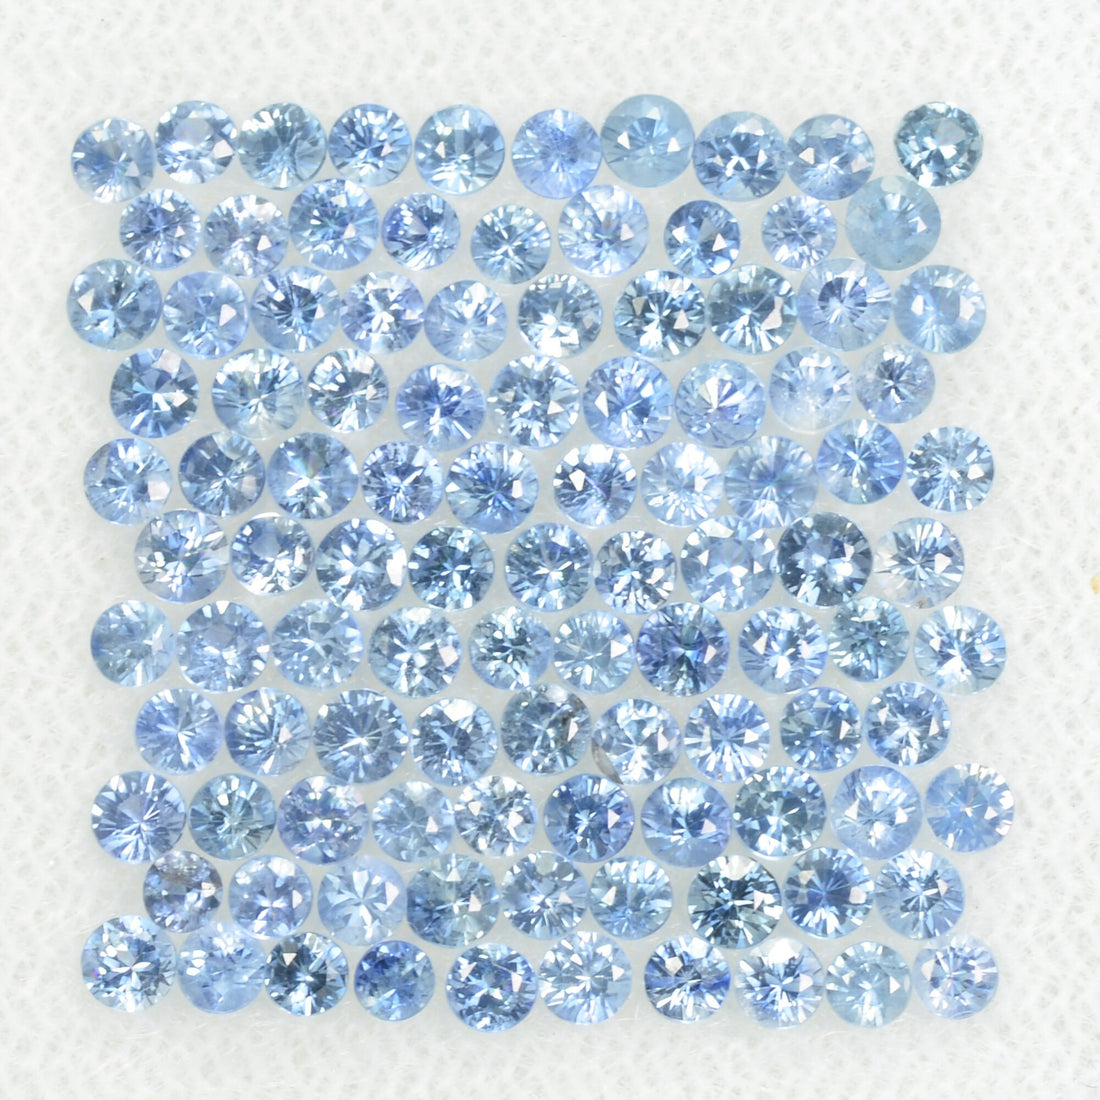 1.2 -2.0 mm Natural Blue Sapphire Loose Gemstone Round Diamond Cut Cleanish Quality Color